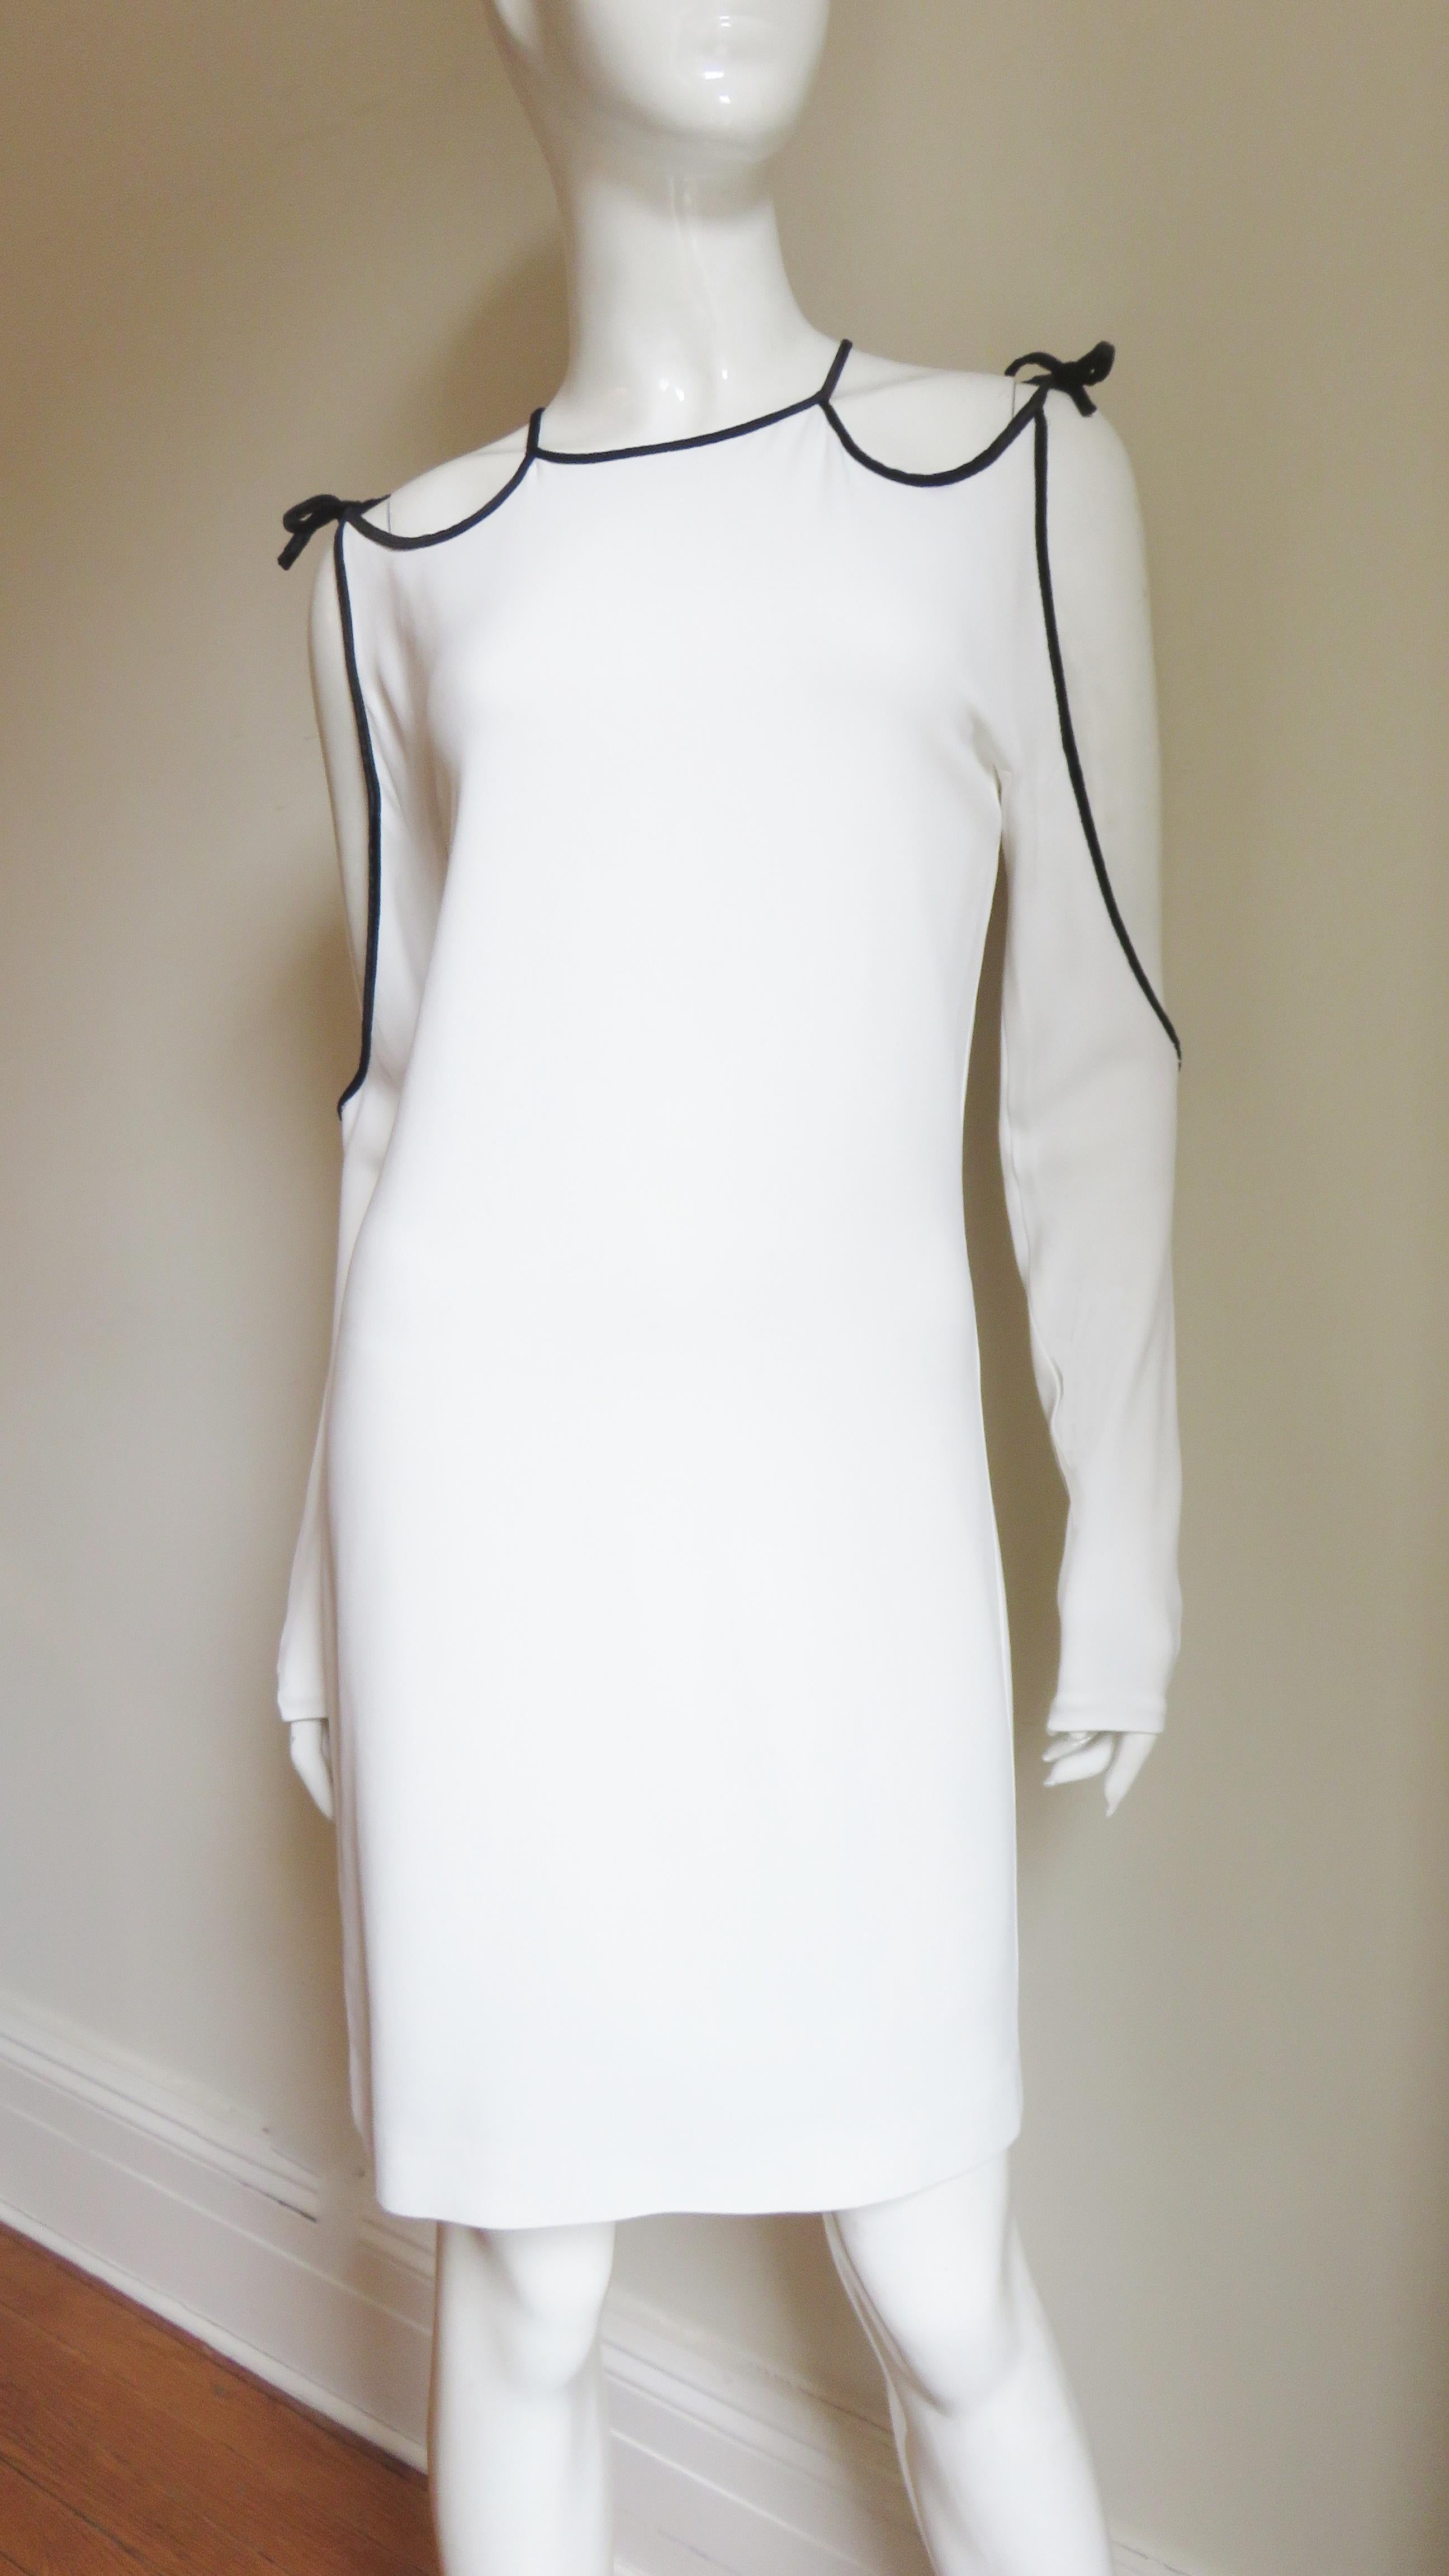 Tom Ford Cut out Shoulders and Sleeves Dress In Good Condition For Sale In Water Mill, NY